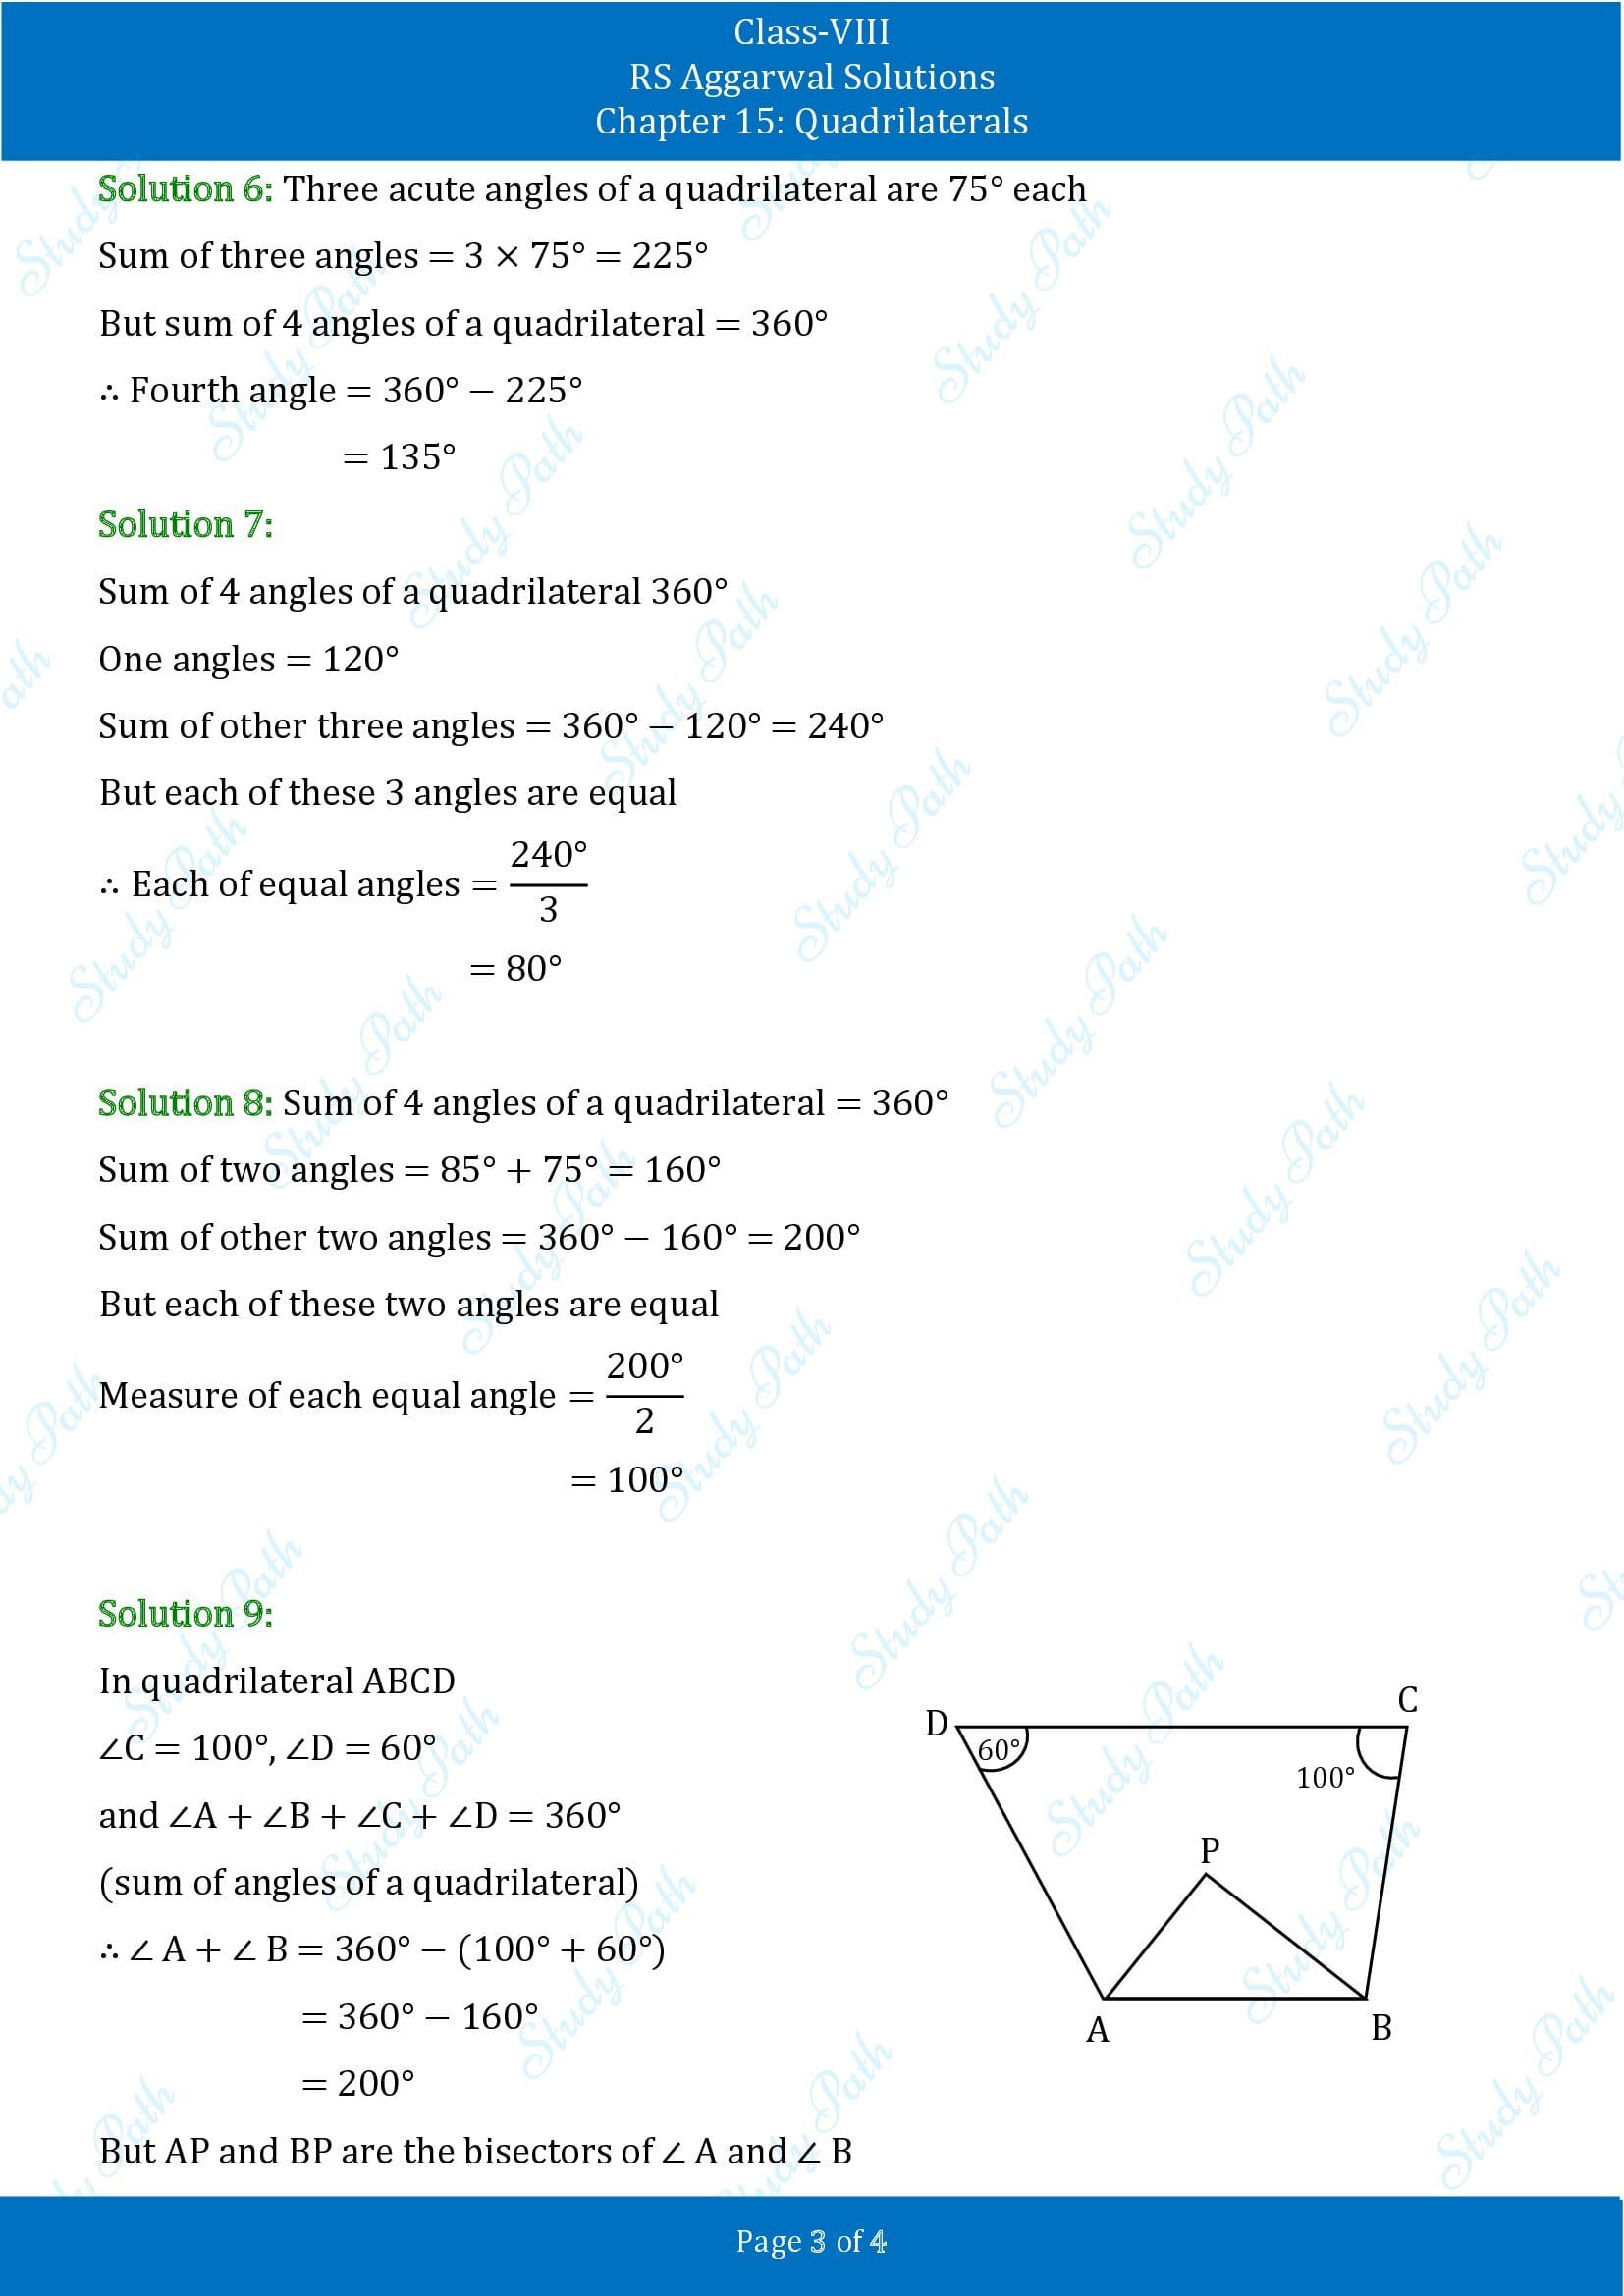 RS Aggarwal Solutions Class 8 Chapter 15 Quadrilaterals 00003